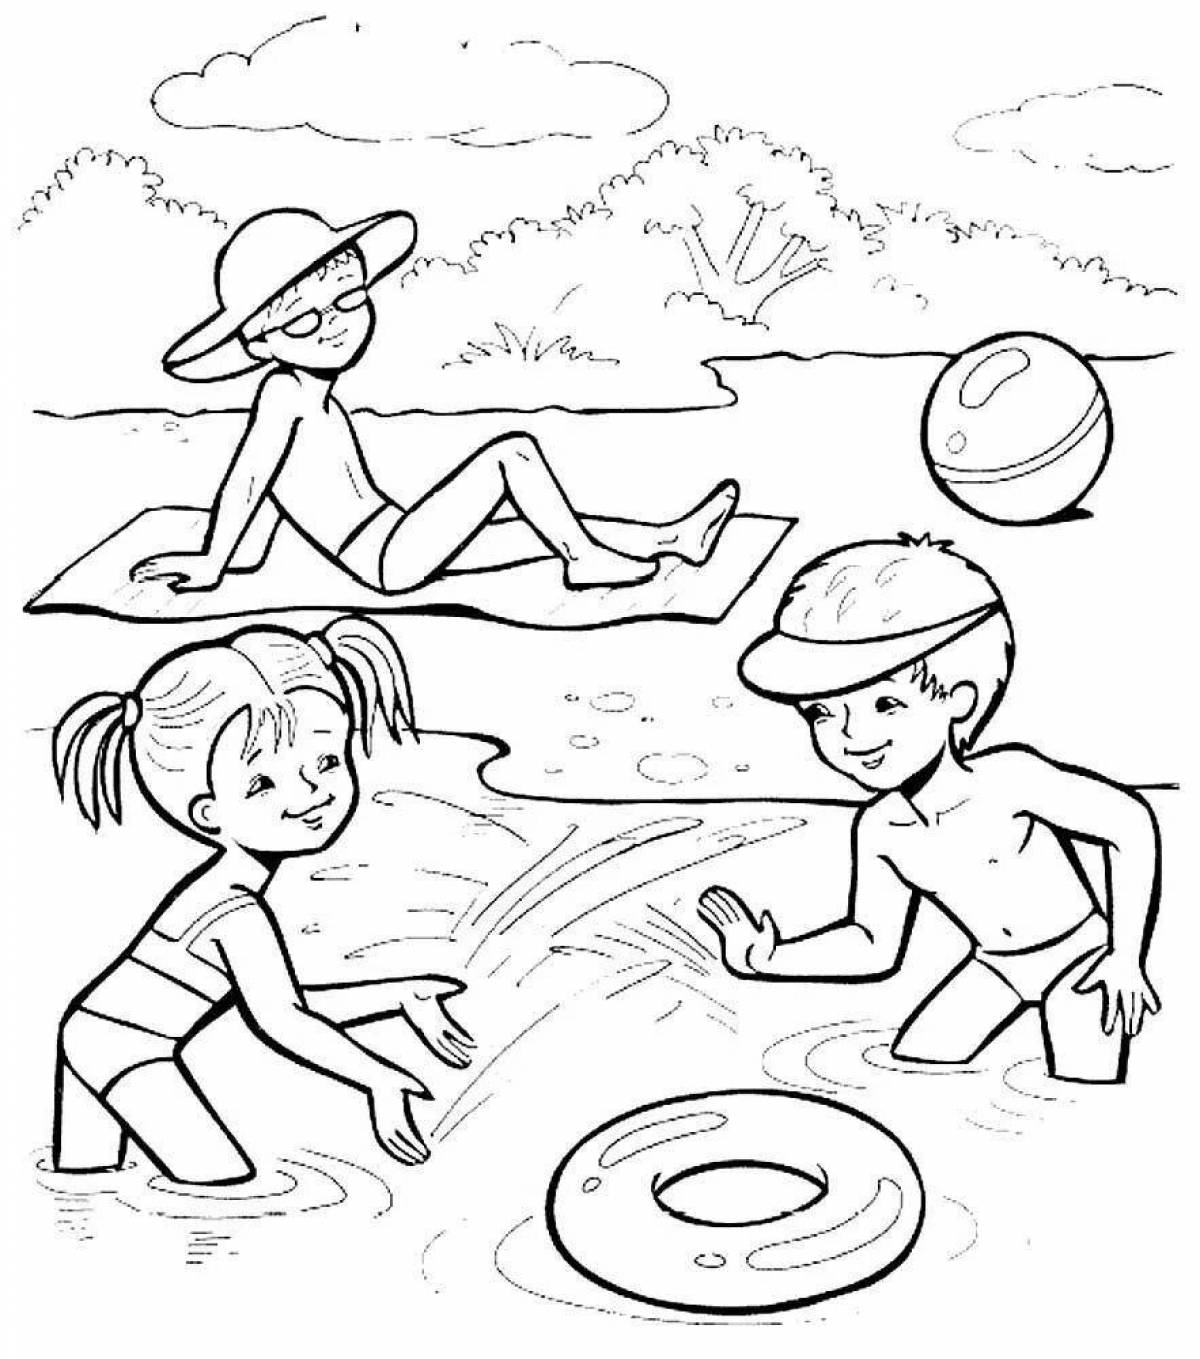 Exciting coloring page